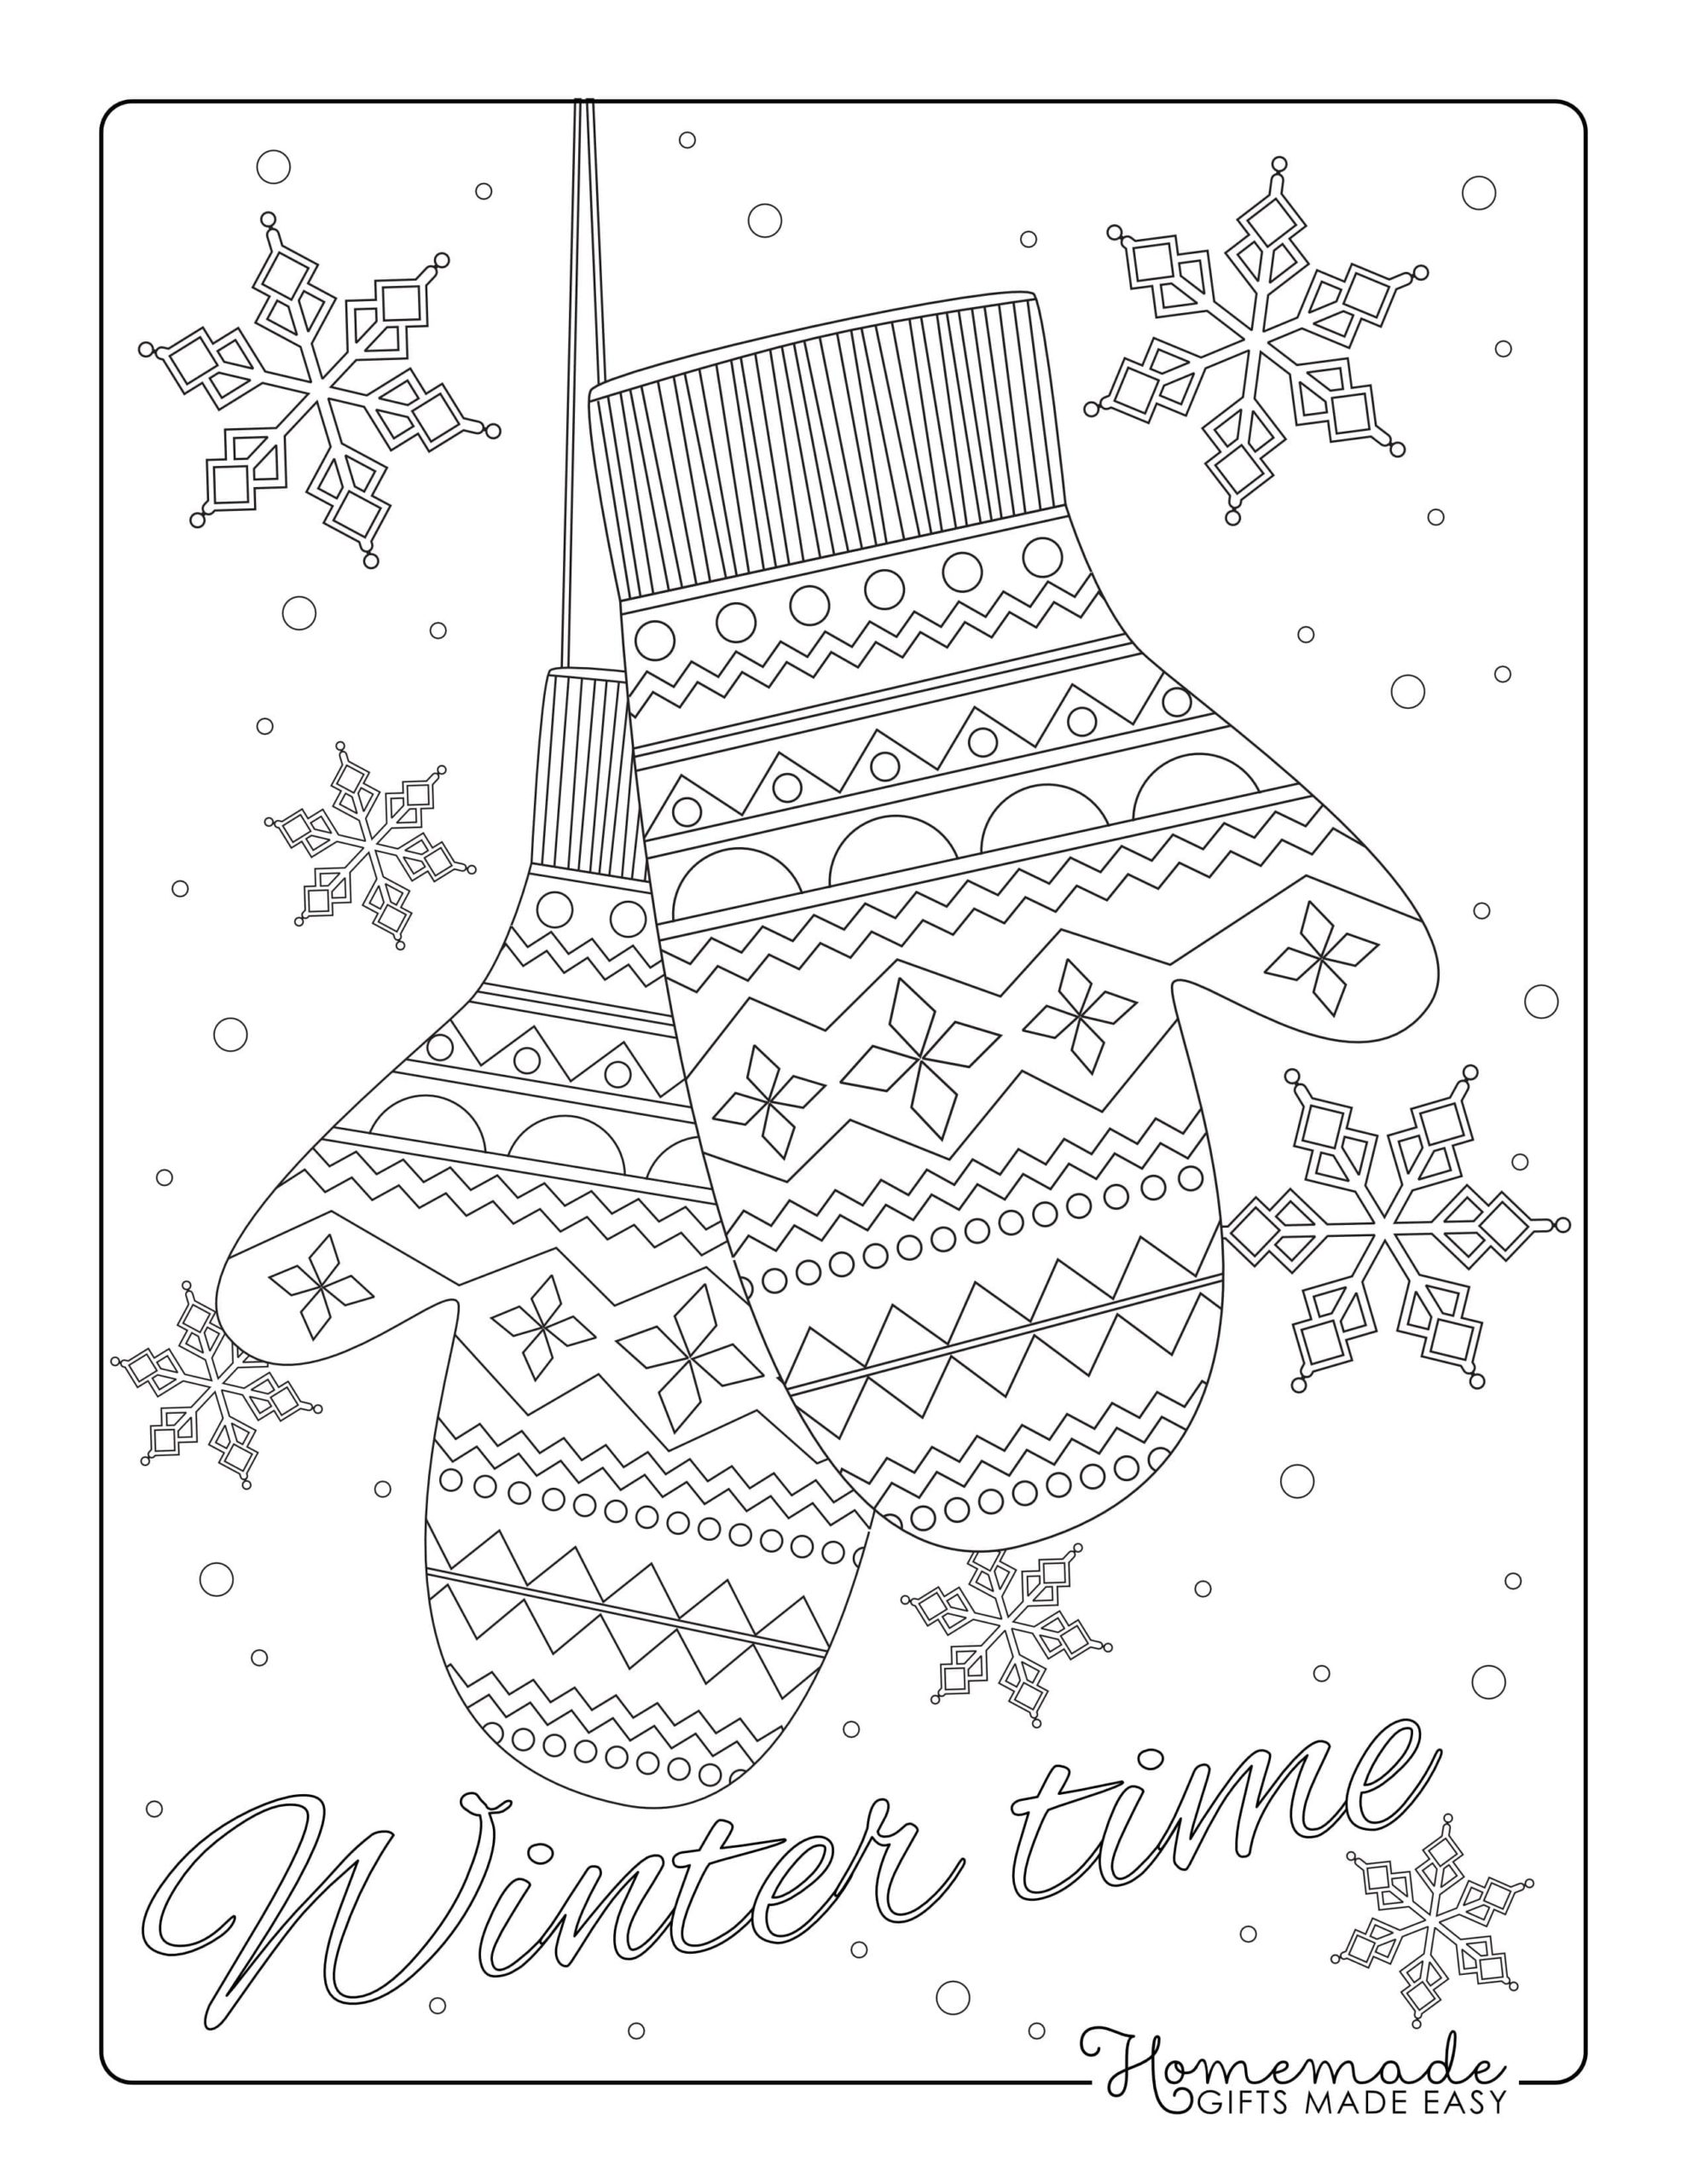 57 Free Winter Coloring Pages for Adults - Happier Human